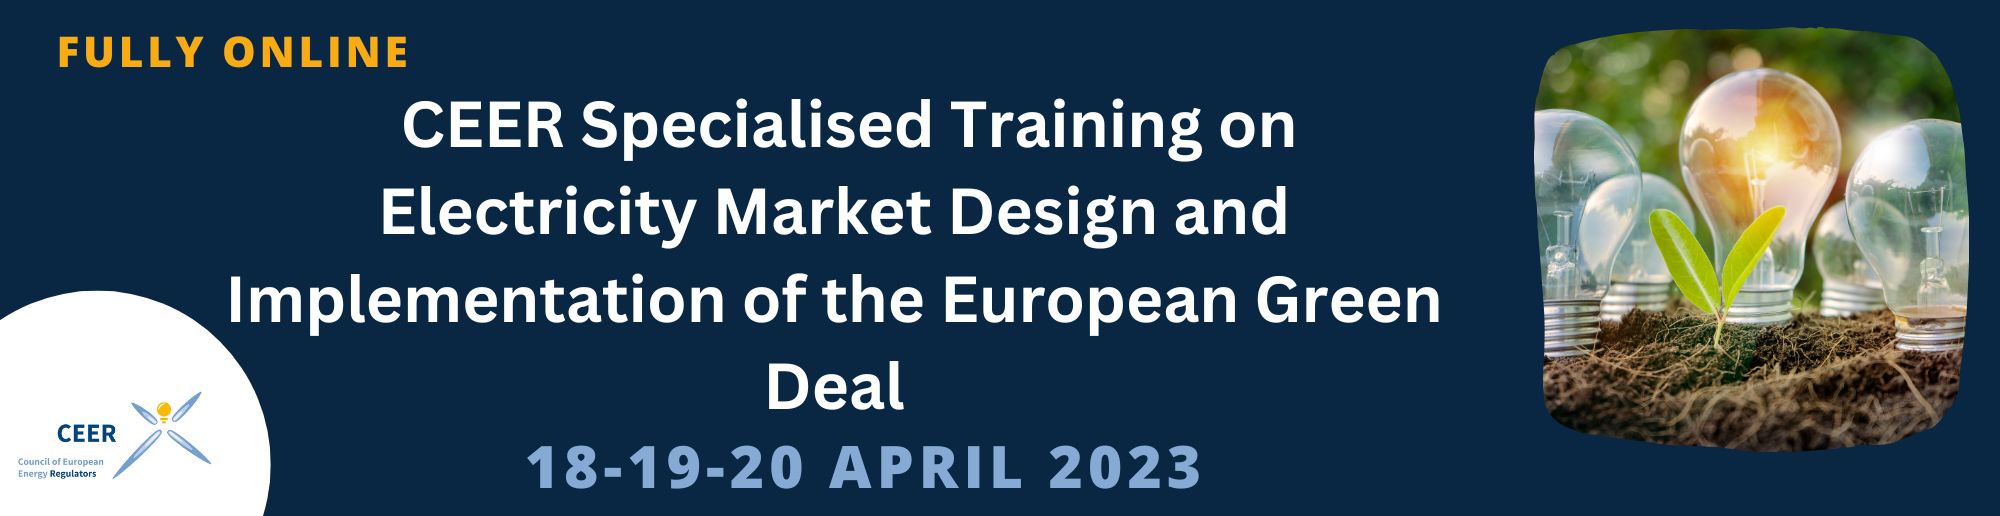 Specialised Training on Electricity Market Design and Implementation of the European Green Deal